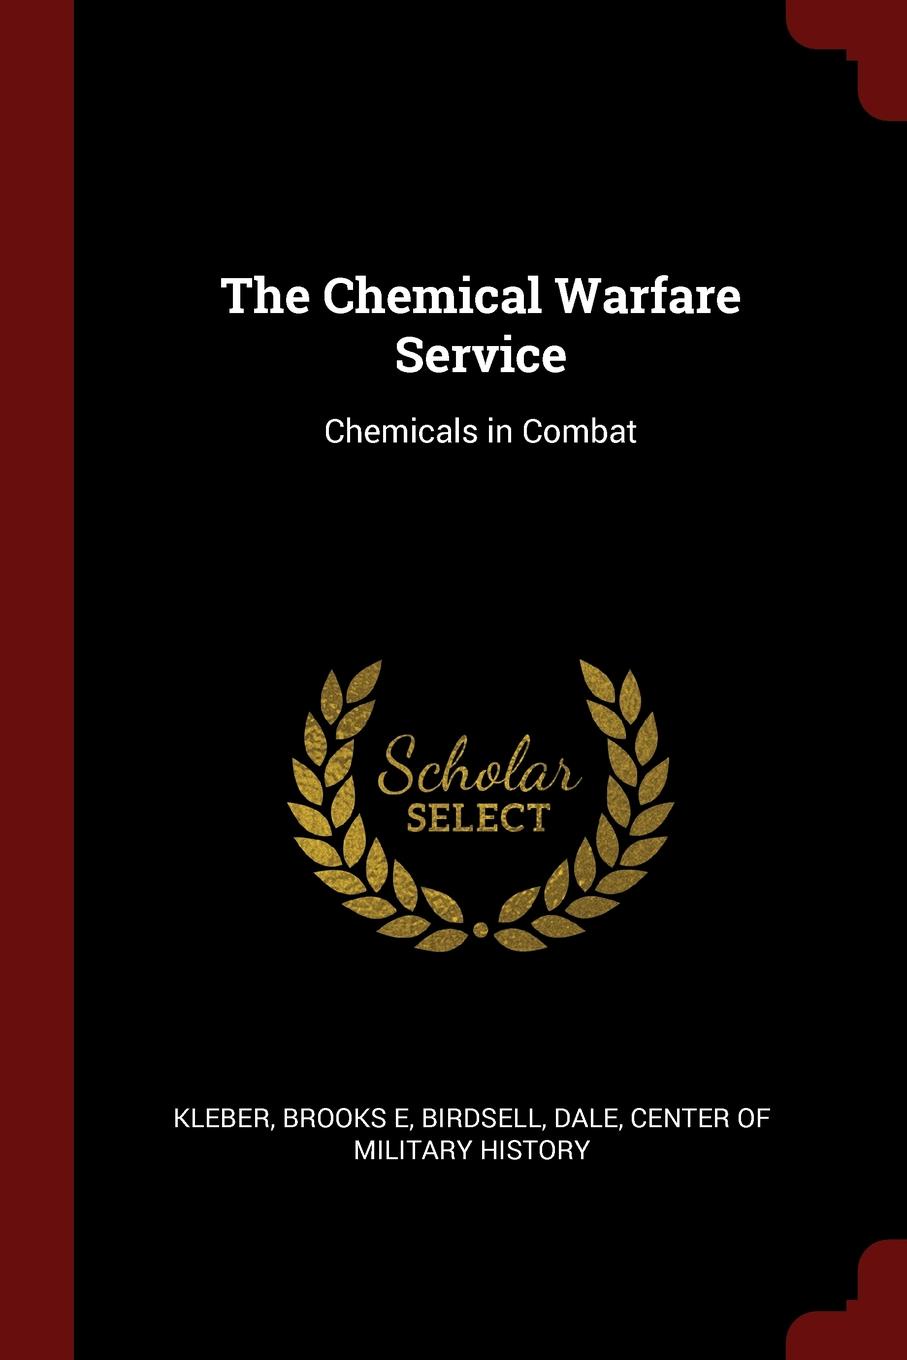 The Chemical Warfare Service. Chemicals in Combat